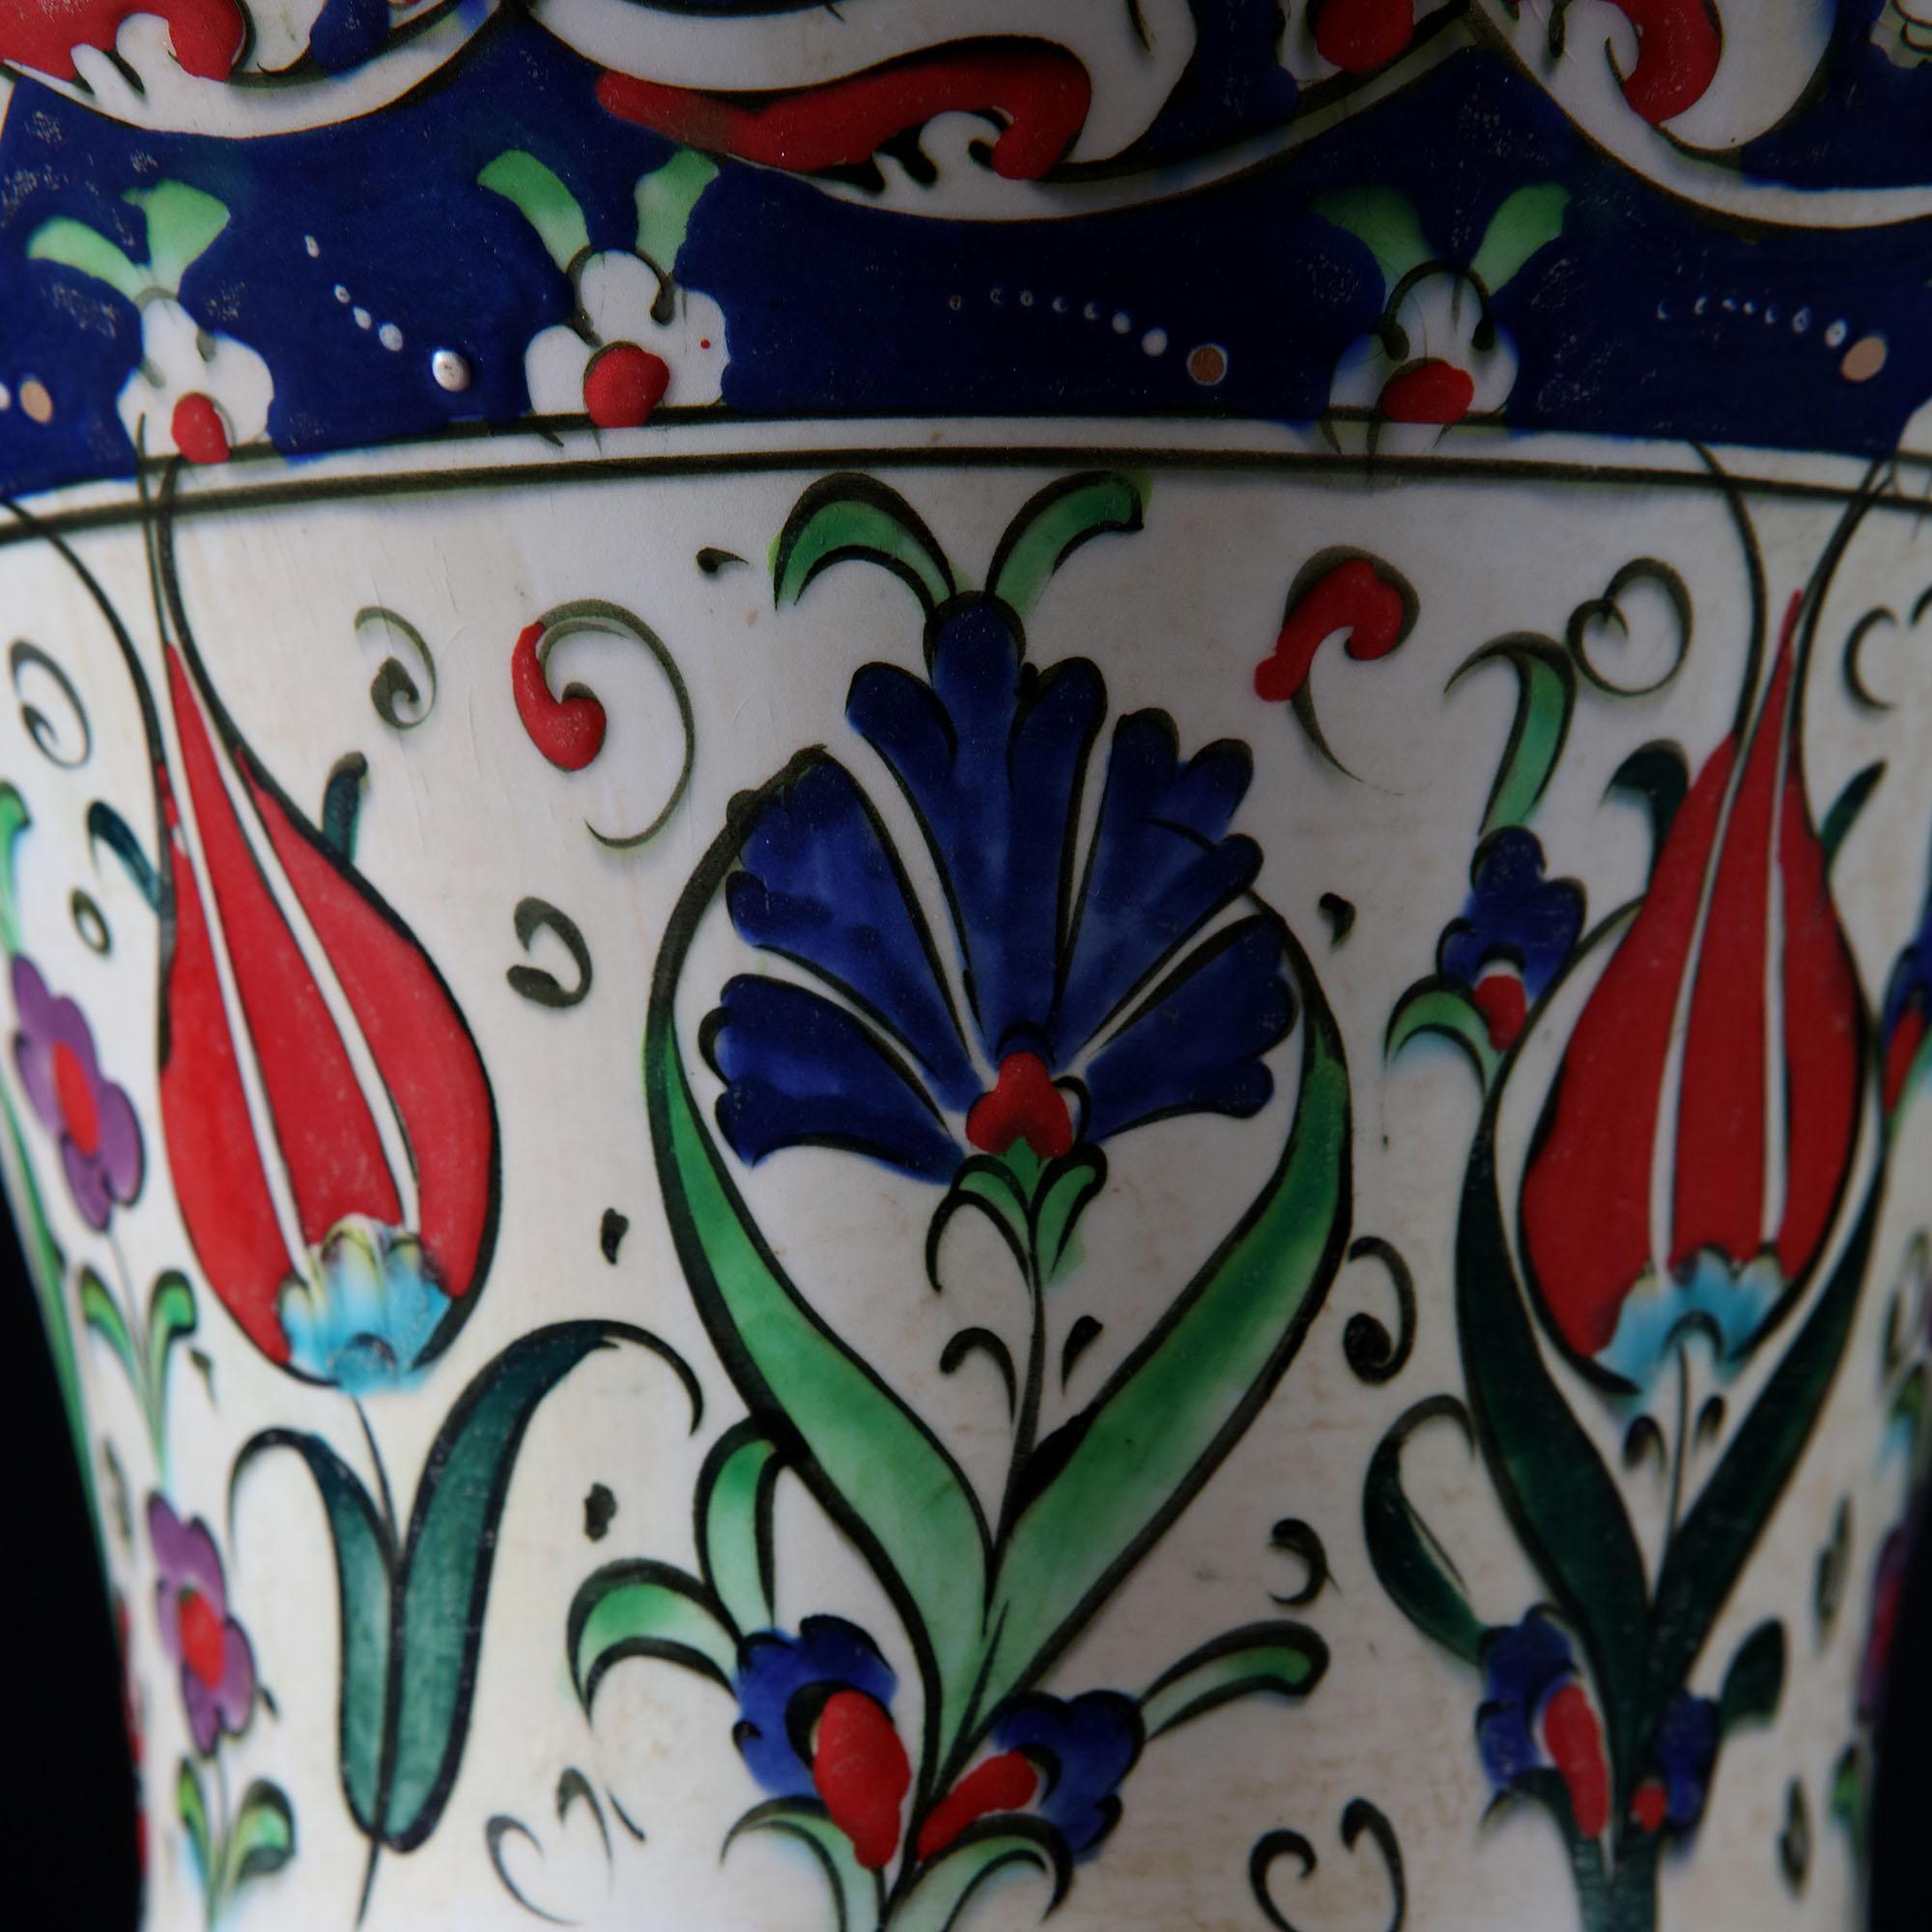 Early 20th Century Polychrome Turkish Islamic Mosque Lamp in the Iznik Style 1